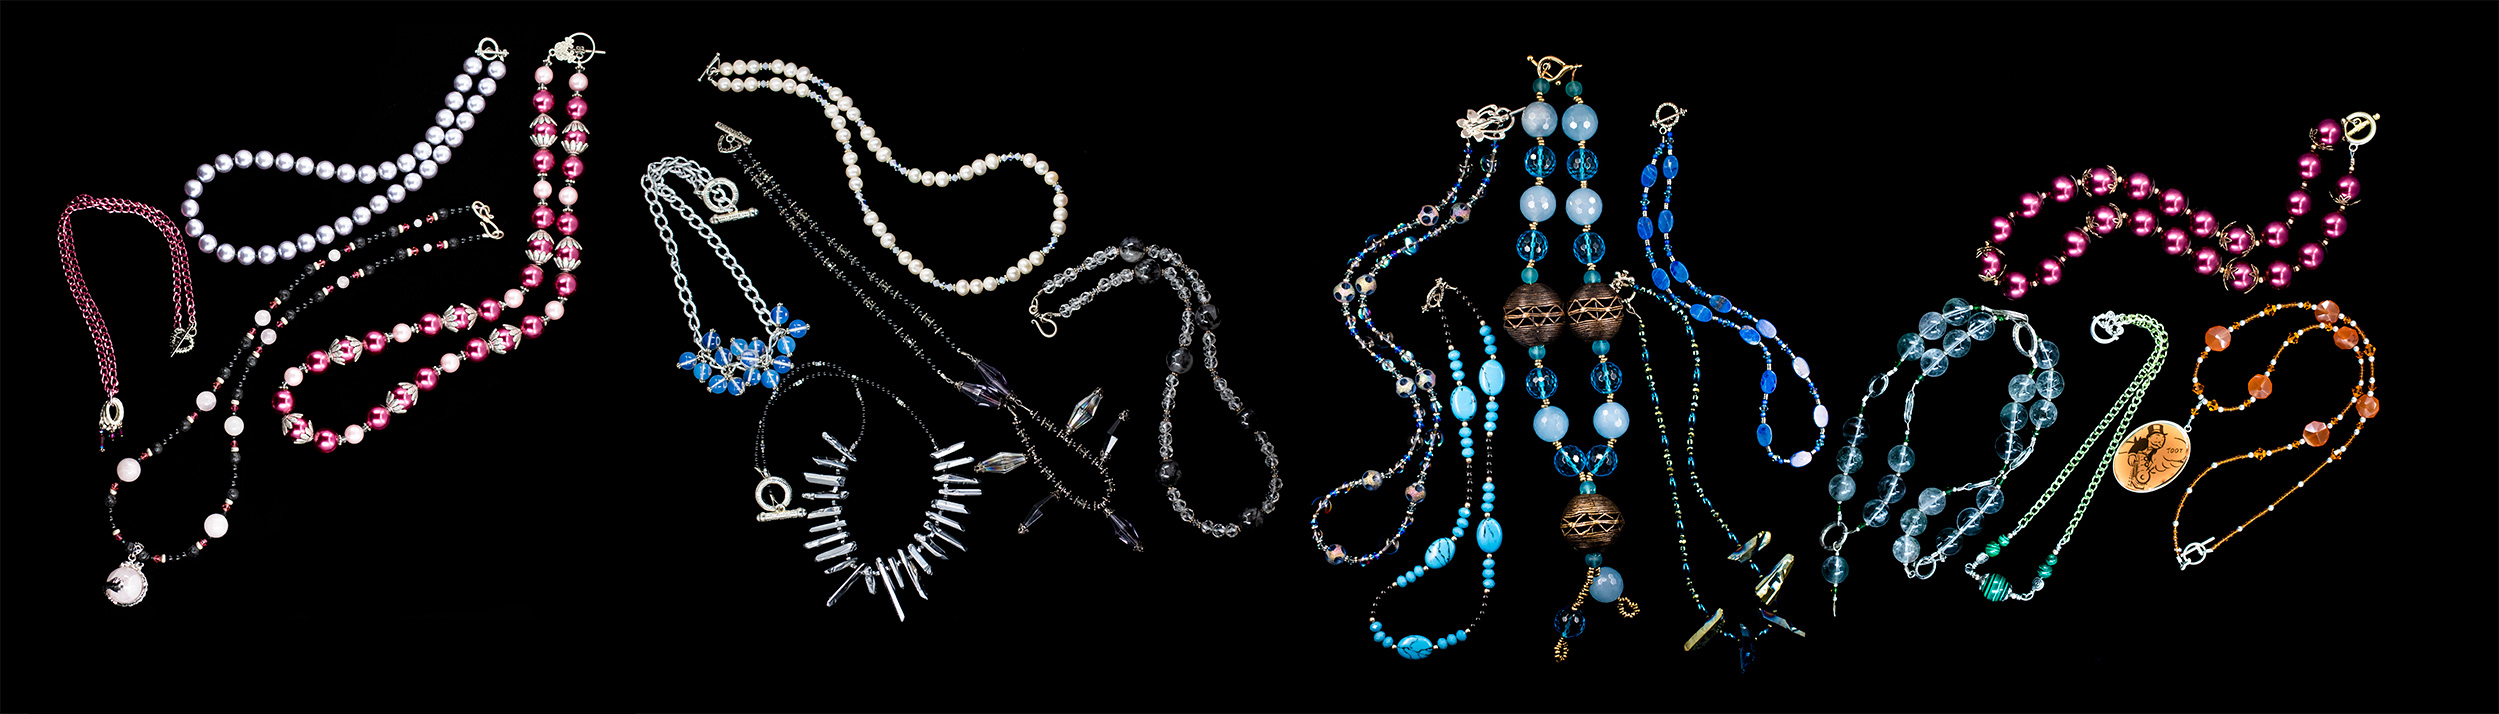 Image of many different necklaces